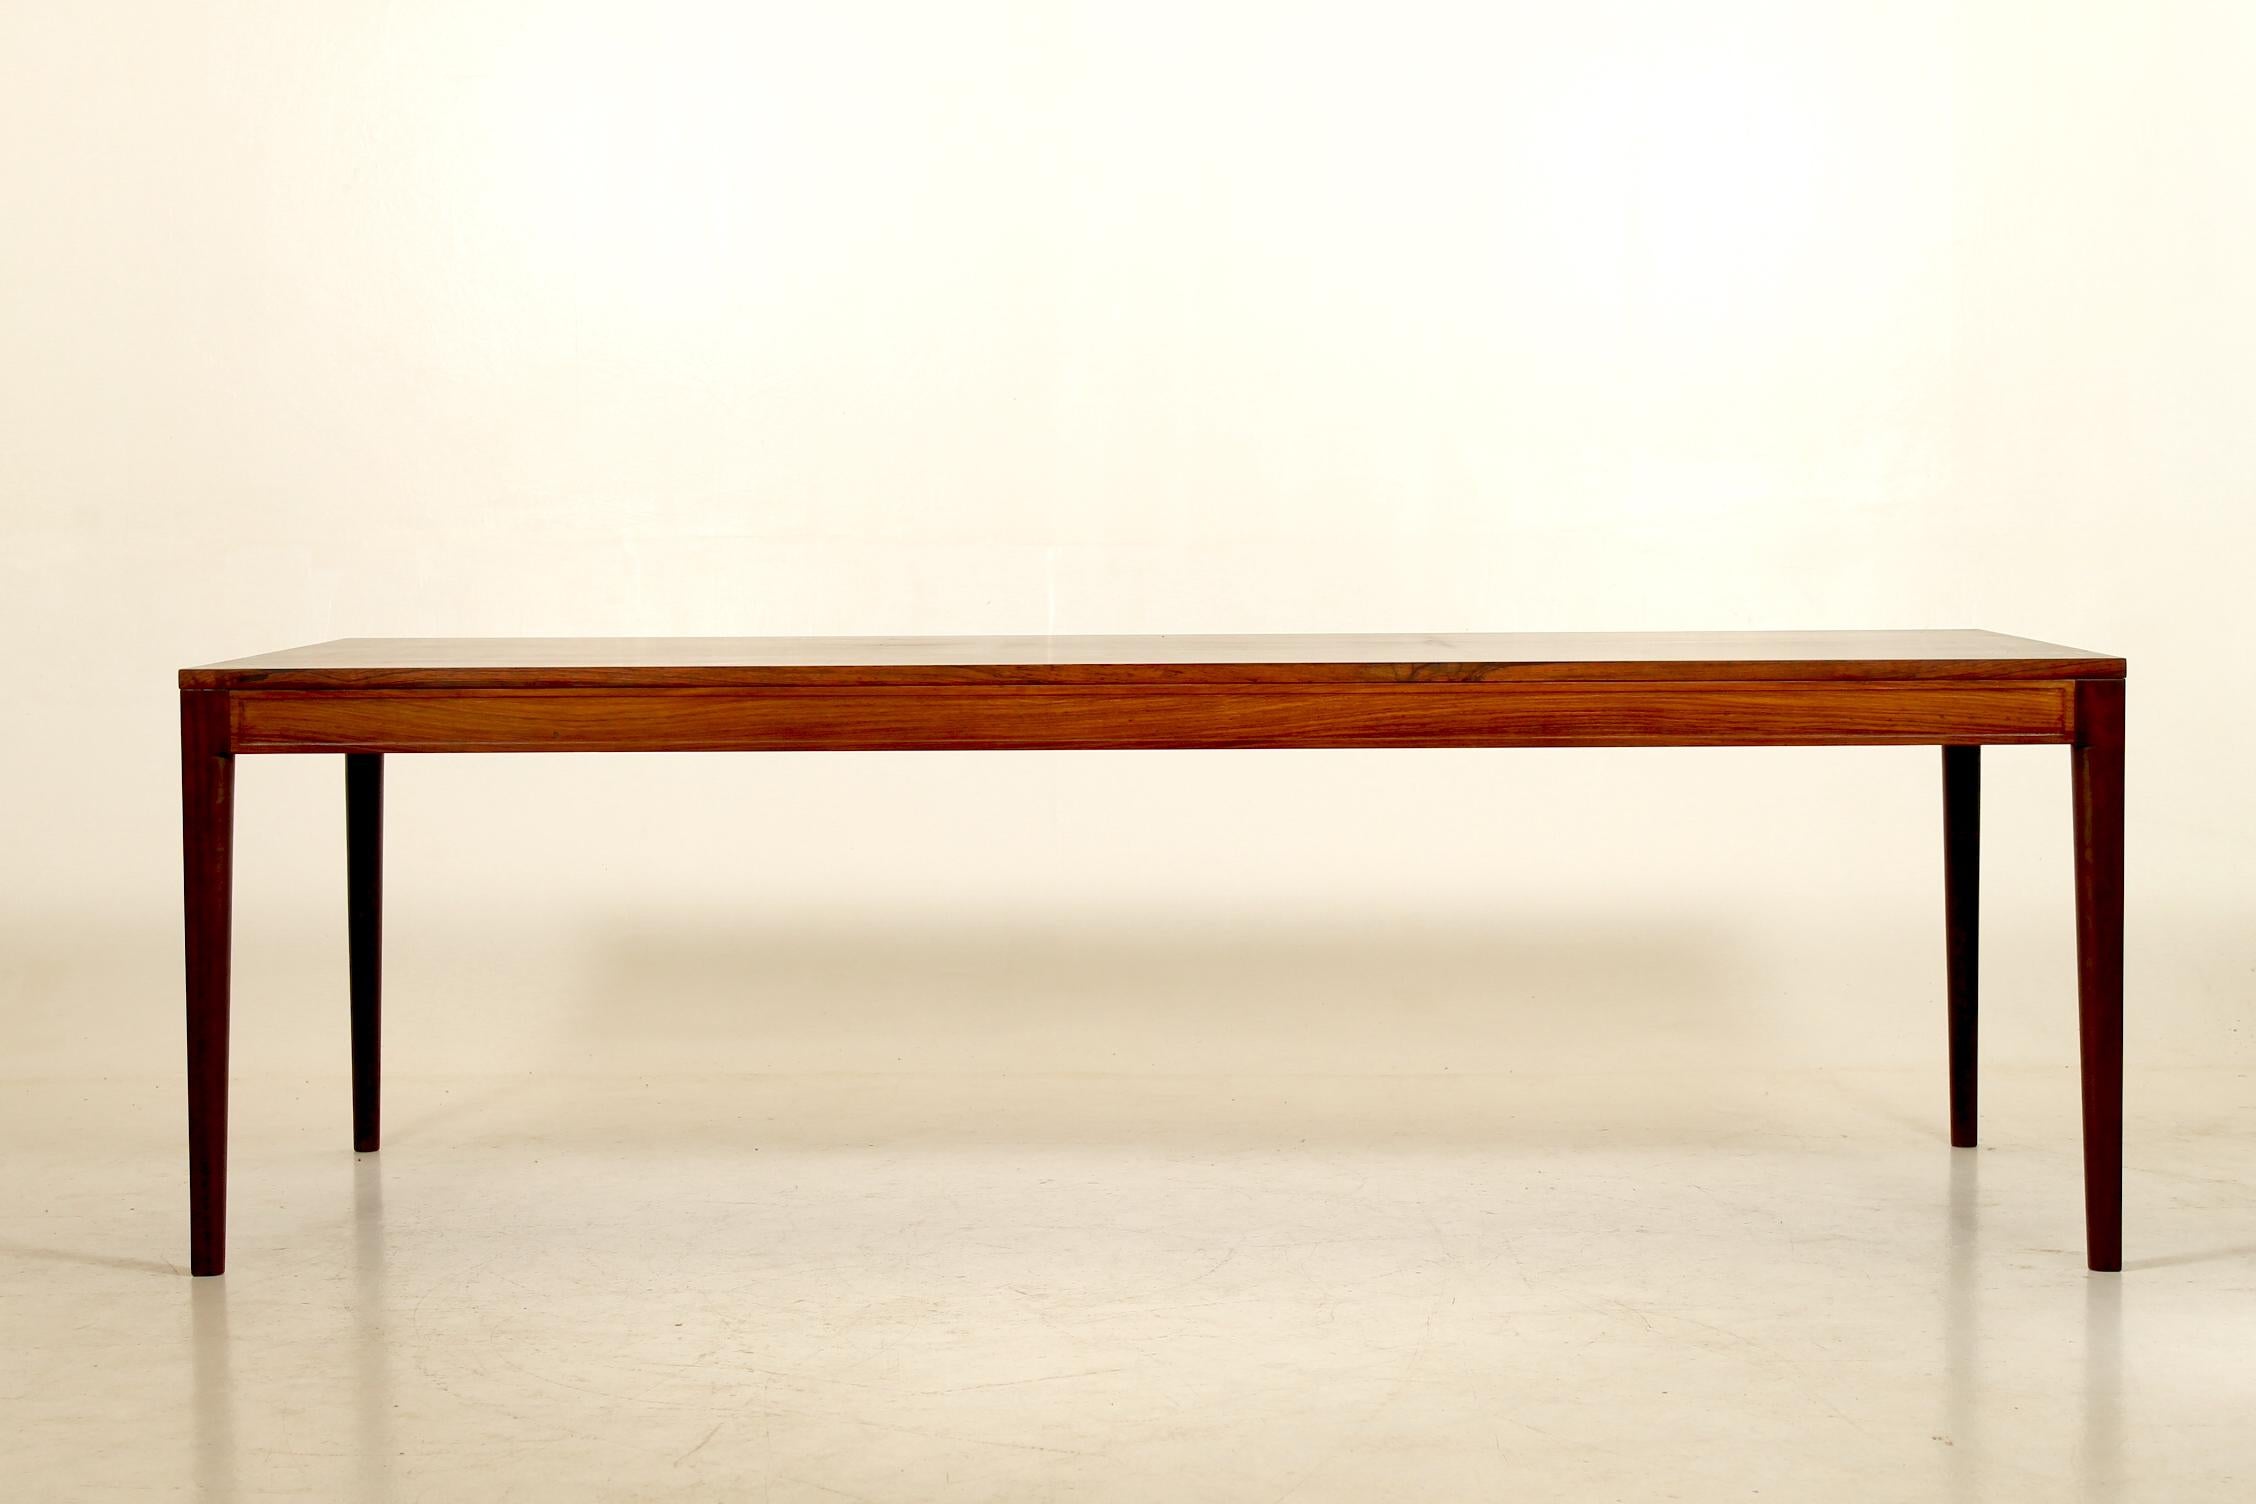 Long Finn Juhl Diplomat series conference table in rosewood.
Designed in the 1960s and manufactued by France and France, Denmark.